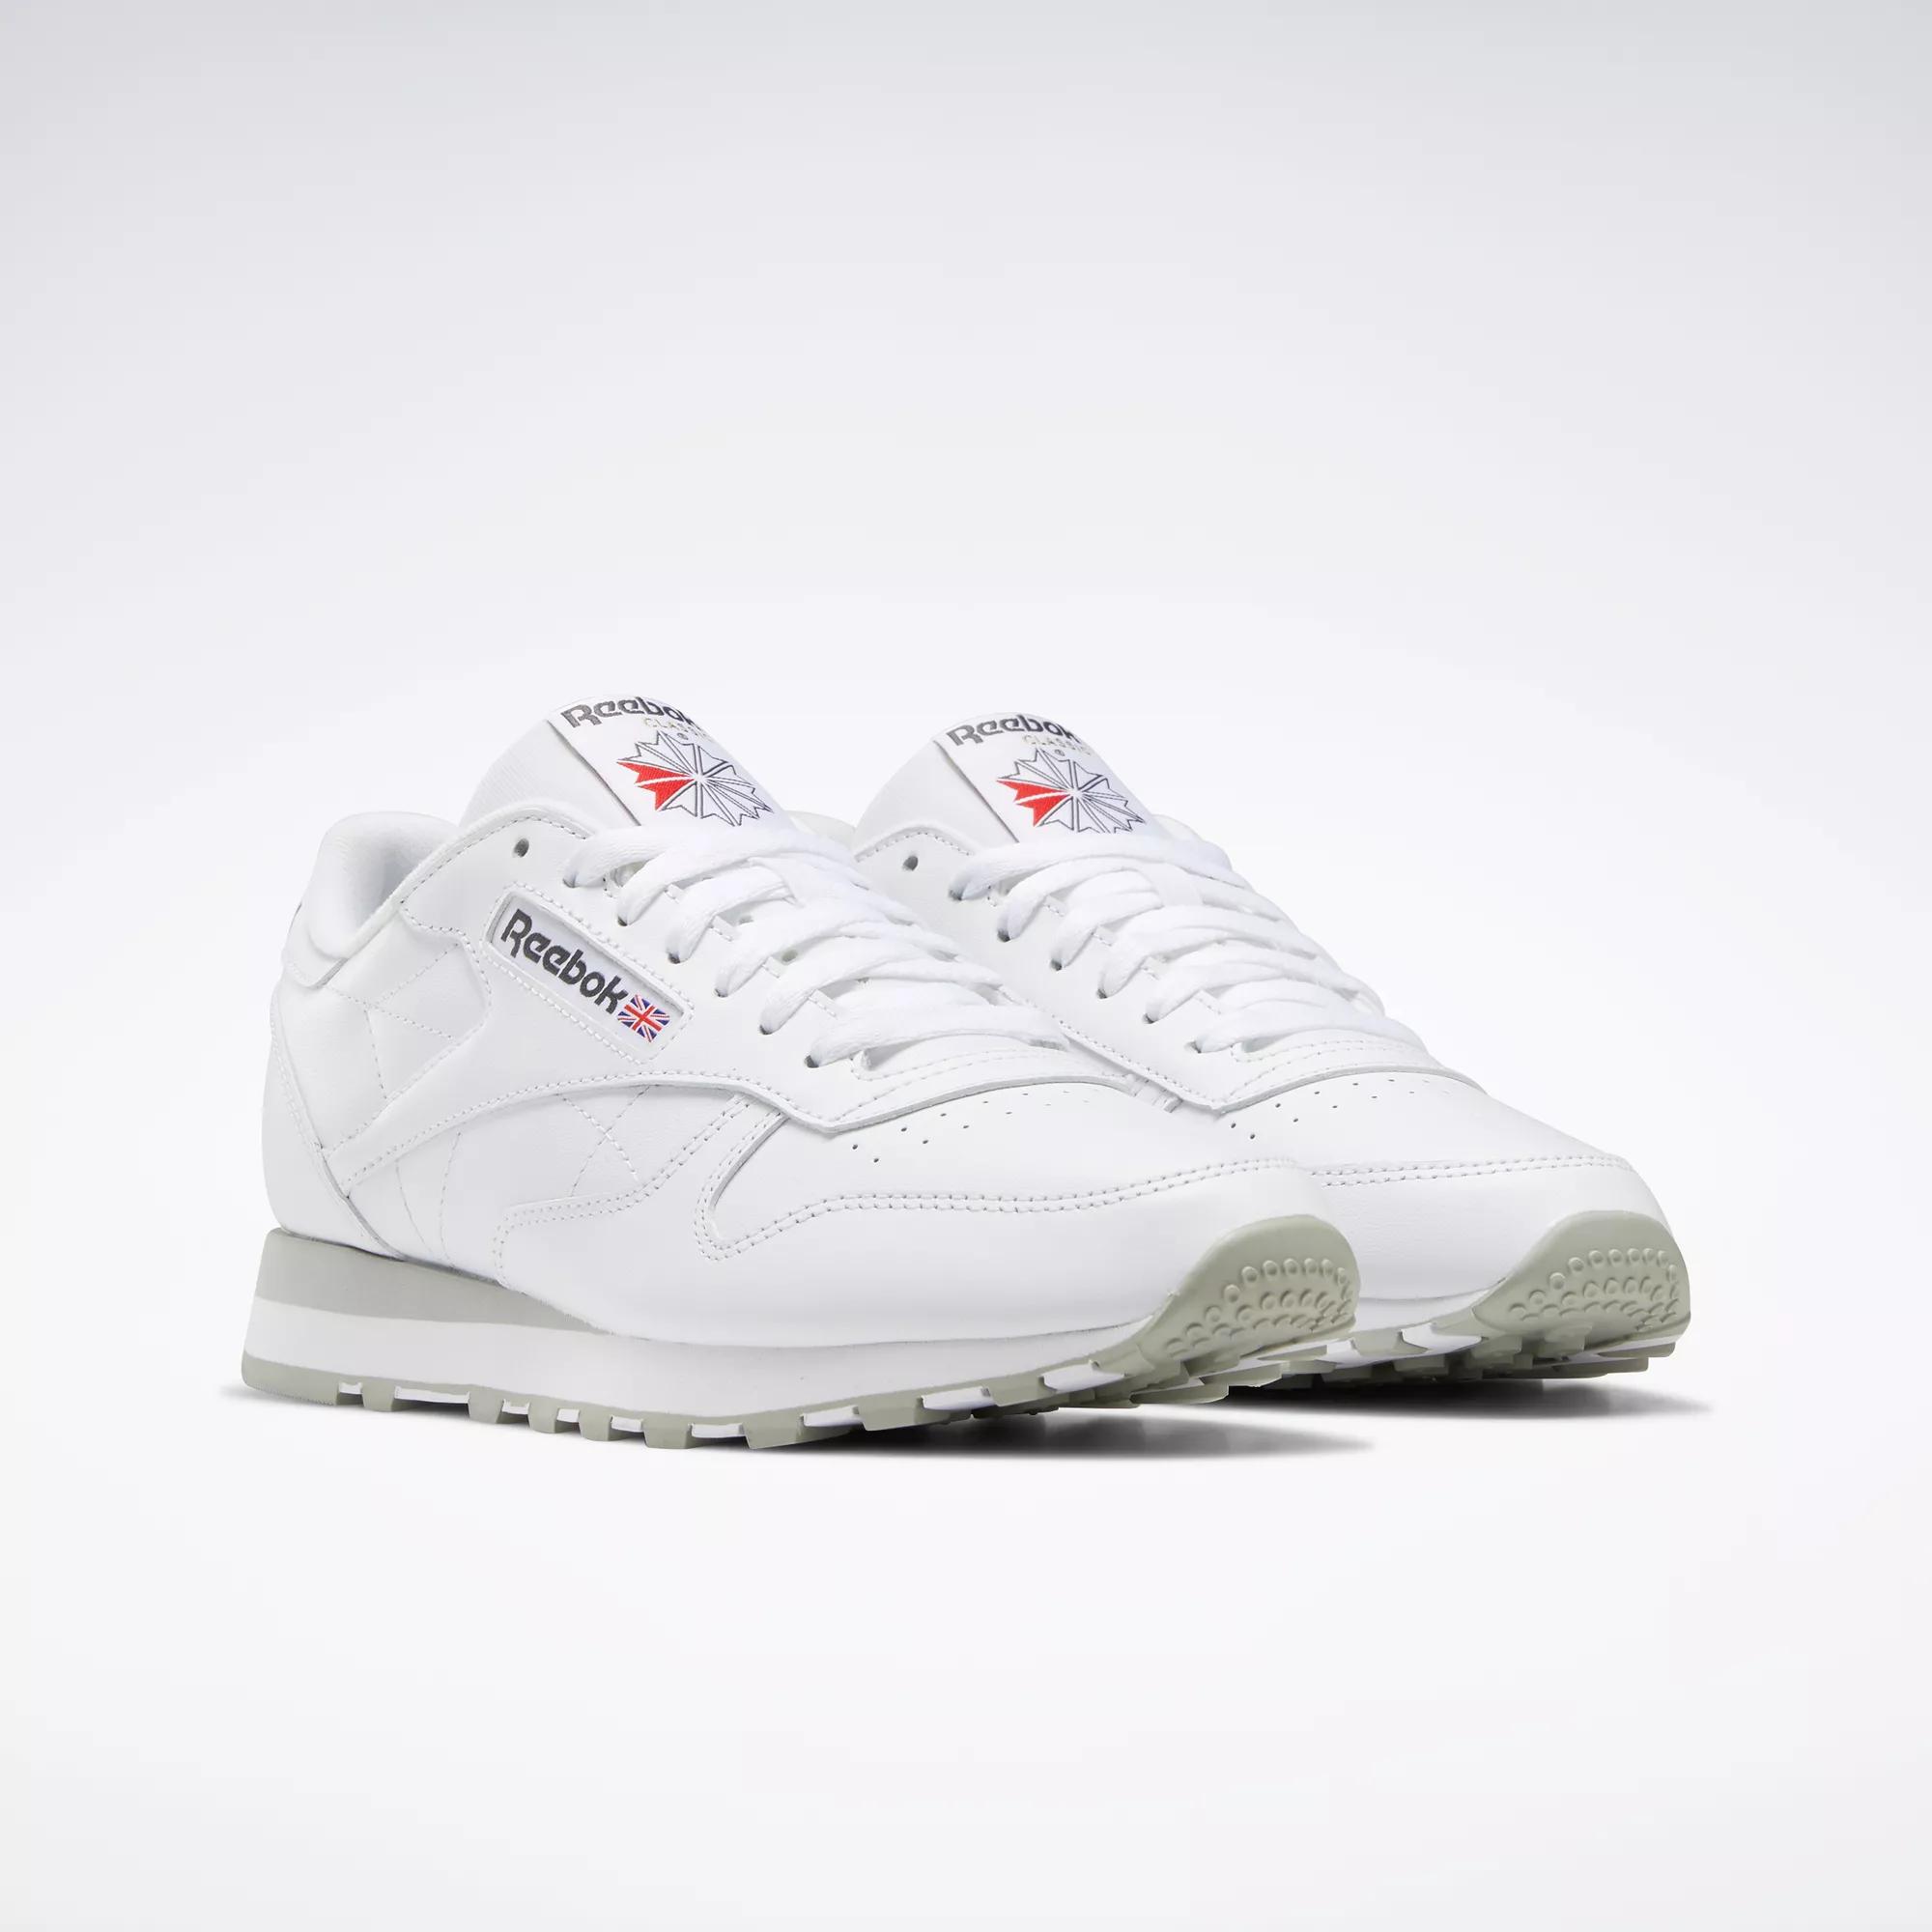 prisa Establecer Árbol Classic Leather Shoes - Ftwr White / Pure Grey 3 / Pure Grey 7 | Reebok